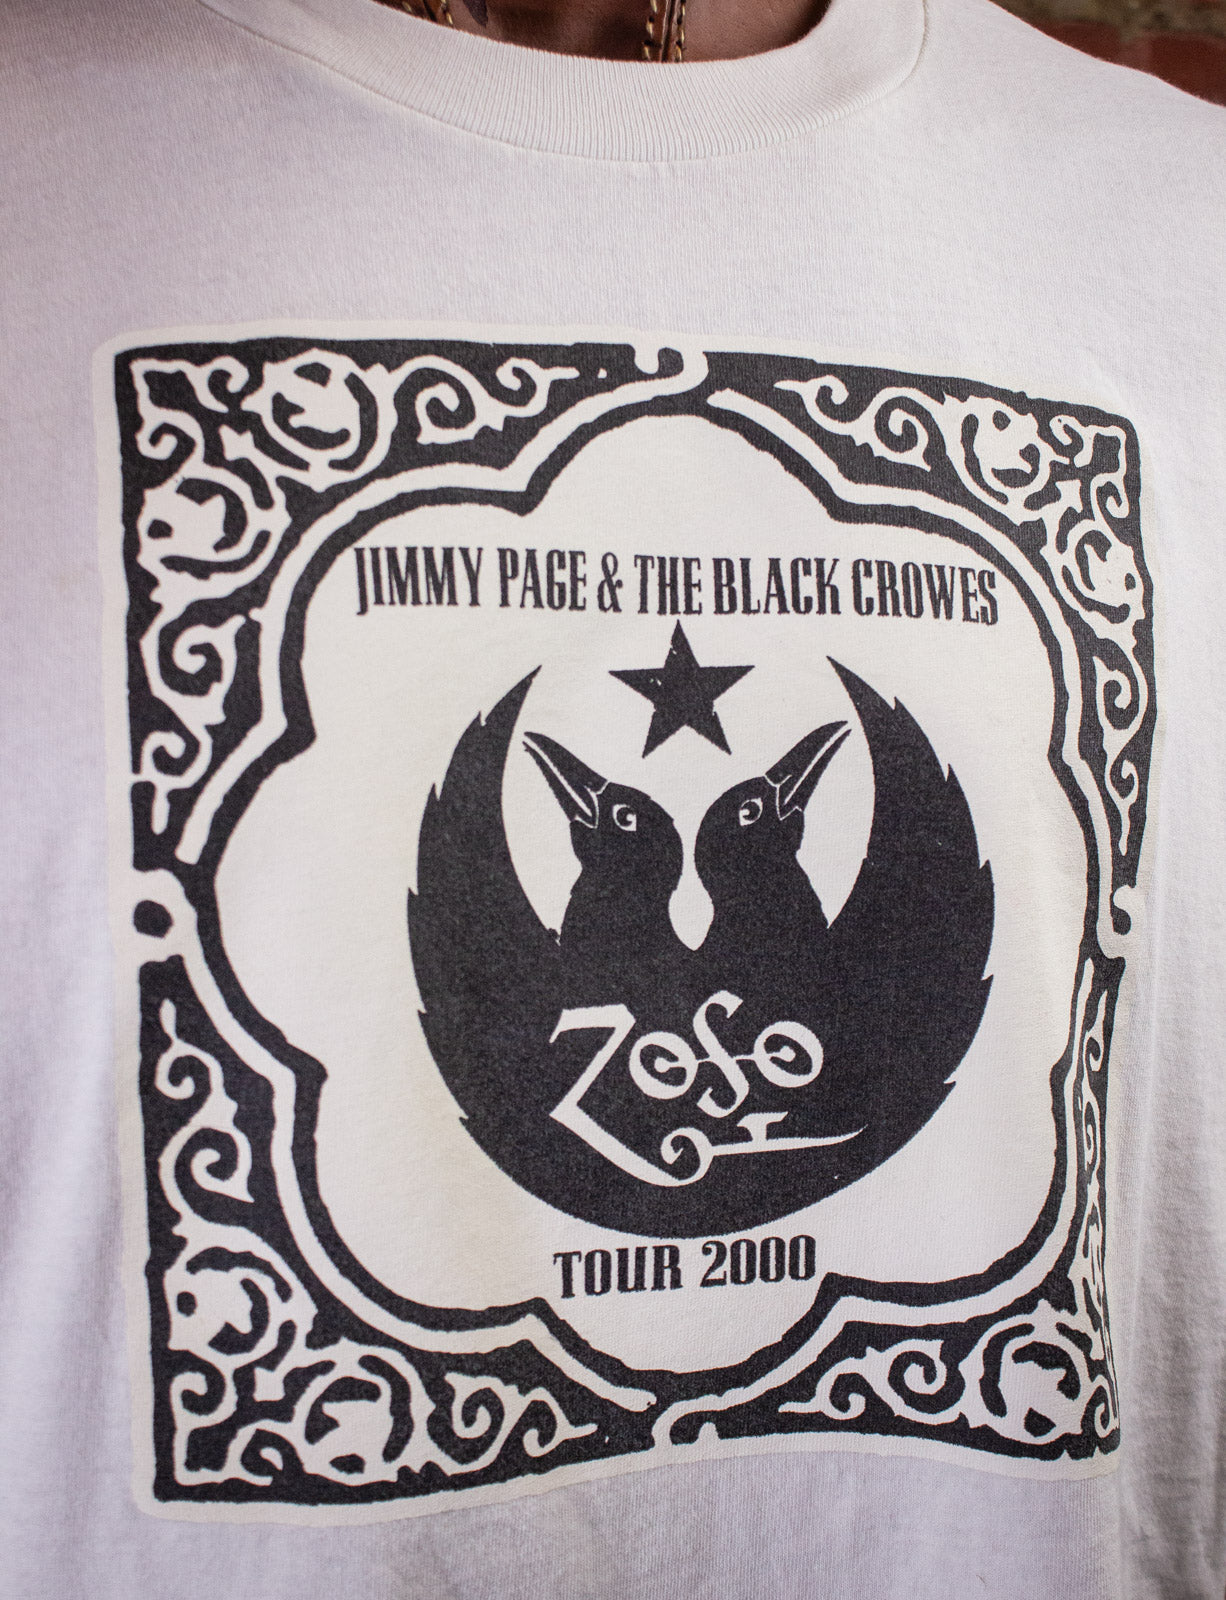 Vintage Jimmy Page & The Black Crowes Concert T shirt 2000 White XL